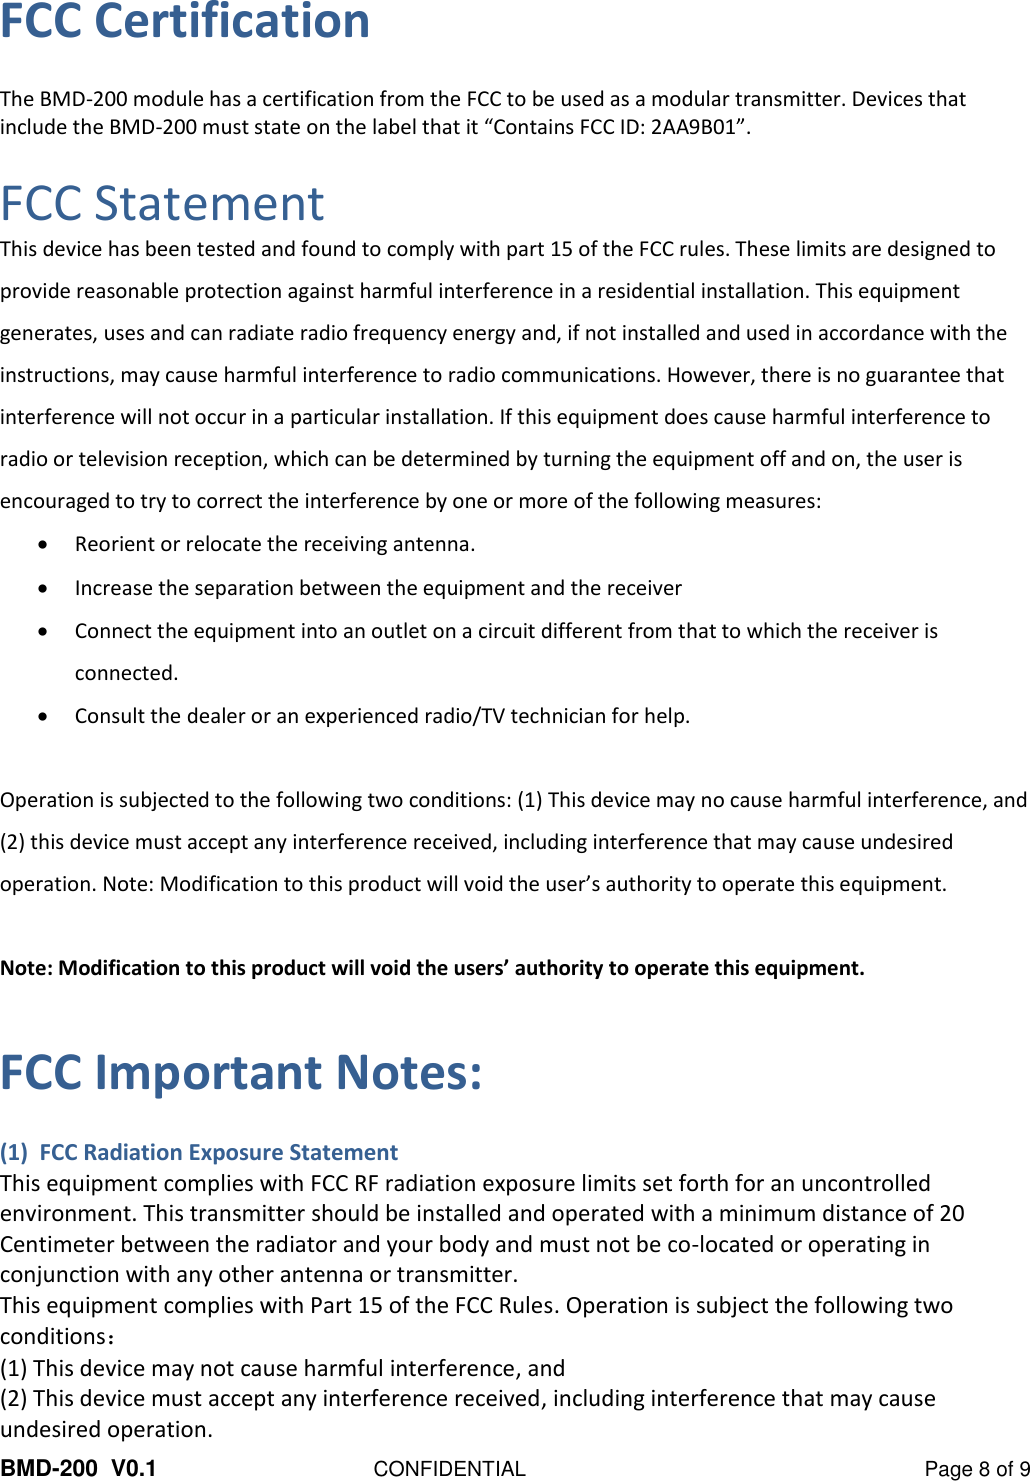  BMD-200  V0.1  CONFIDENTIAL  Page 8 of 9 FCC Certification The BMD-200 module has a certification from the FCC to be used as a modular transmitter. Devices that include the BMD-200 must state on the label that it “Contains FCC ID: 2AA9B01”.  FCC Statement This device has been tested and found to comply with part 15 of the FCC rules. These limits are designed to provide reasonable protection against harmful interference in a residential installation. This equipment generates, uses and can radiate radio frequency energy and, if not installed and used in accordance with the instructions, may cause harmful interference to radio communications. However, there is no guarantee that interference will not occur in a particular installation. If this equipment does cause harmful interference to radio or television reception, which can be determined by turning the equipment off and on, the user is encouraged to try to correct the interference by one or more of the following measures:  Reorient or relocate the receiving antenna.  Increase the separation between the equipment and the receiver  Connect the equipment into an outlet on a circuit different from that to which the receiver is connected.  Consult the dealer or an experienced radio/TV technician for help.  Operation is subjected to the following two conditions: (1) This device may no cause harmful interference, and (2) this device must accept any interference received, including interference that may cause undesired operation. Note: Modification to this product will void the user’s authority to operate this equipment.  Note: Modification to this product will void the users’ authority to operate this equipment.  FCC Important Notes: (1)  FCC Radiation Exposure Statement This equipment complies with FCC RF radiation exposure limits set forth for an uncontrolled environment. This transmitter should be installed and operated with a minimum distance of 20 Centimeter between the radiator and your body and must not be co-located or operating in conjunction with any other antenna or transmitter. This equipment complies with Part 15 of the FCC Rules. Operation is subject the following two conditions： (1) This device may not cause harmful interference, and (2) This device must accept any interference received, including interference that may cause undesired operation.  